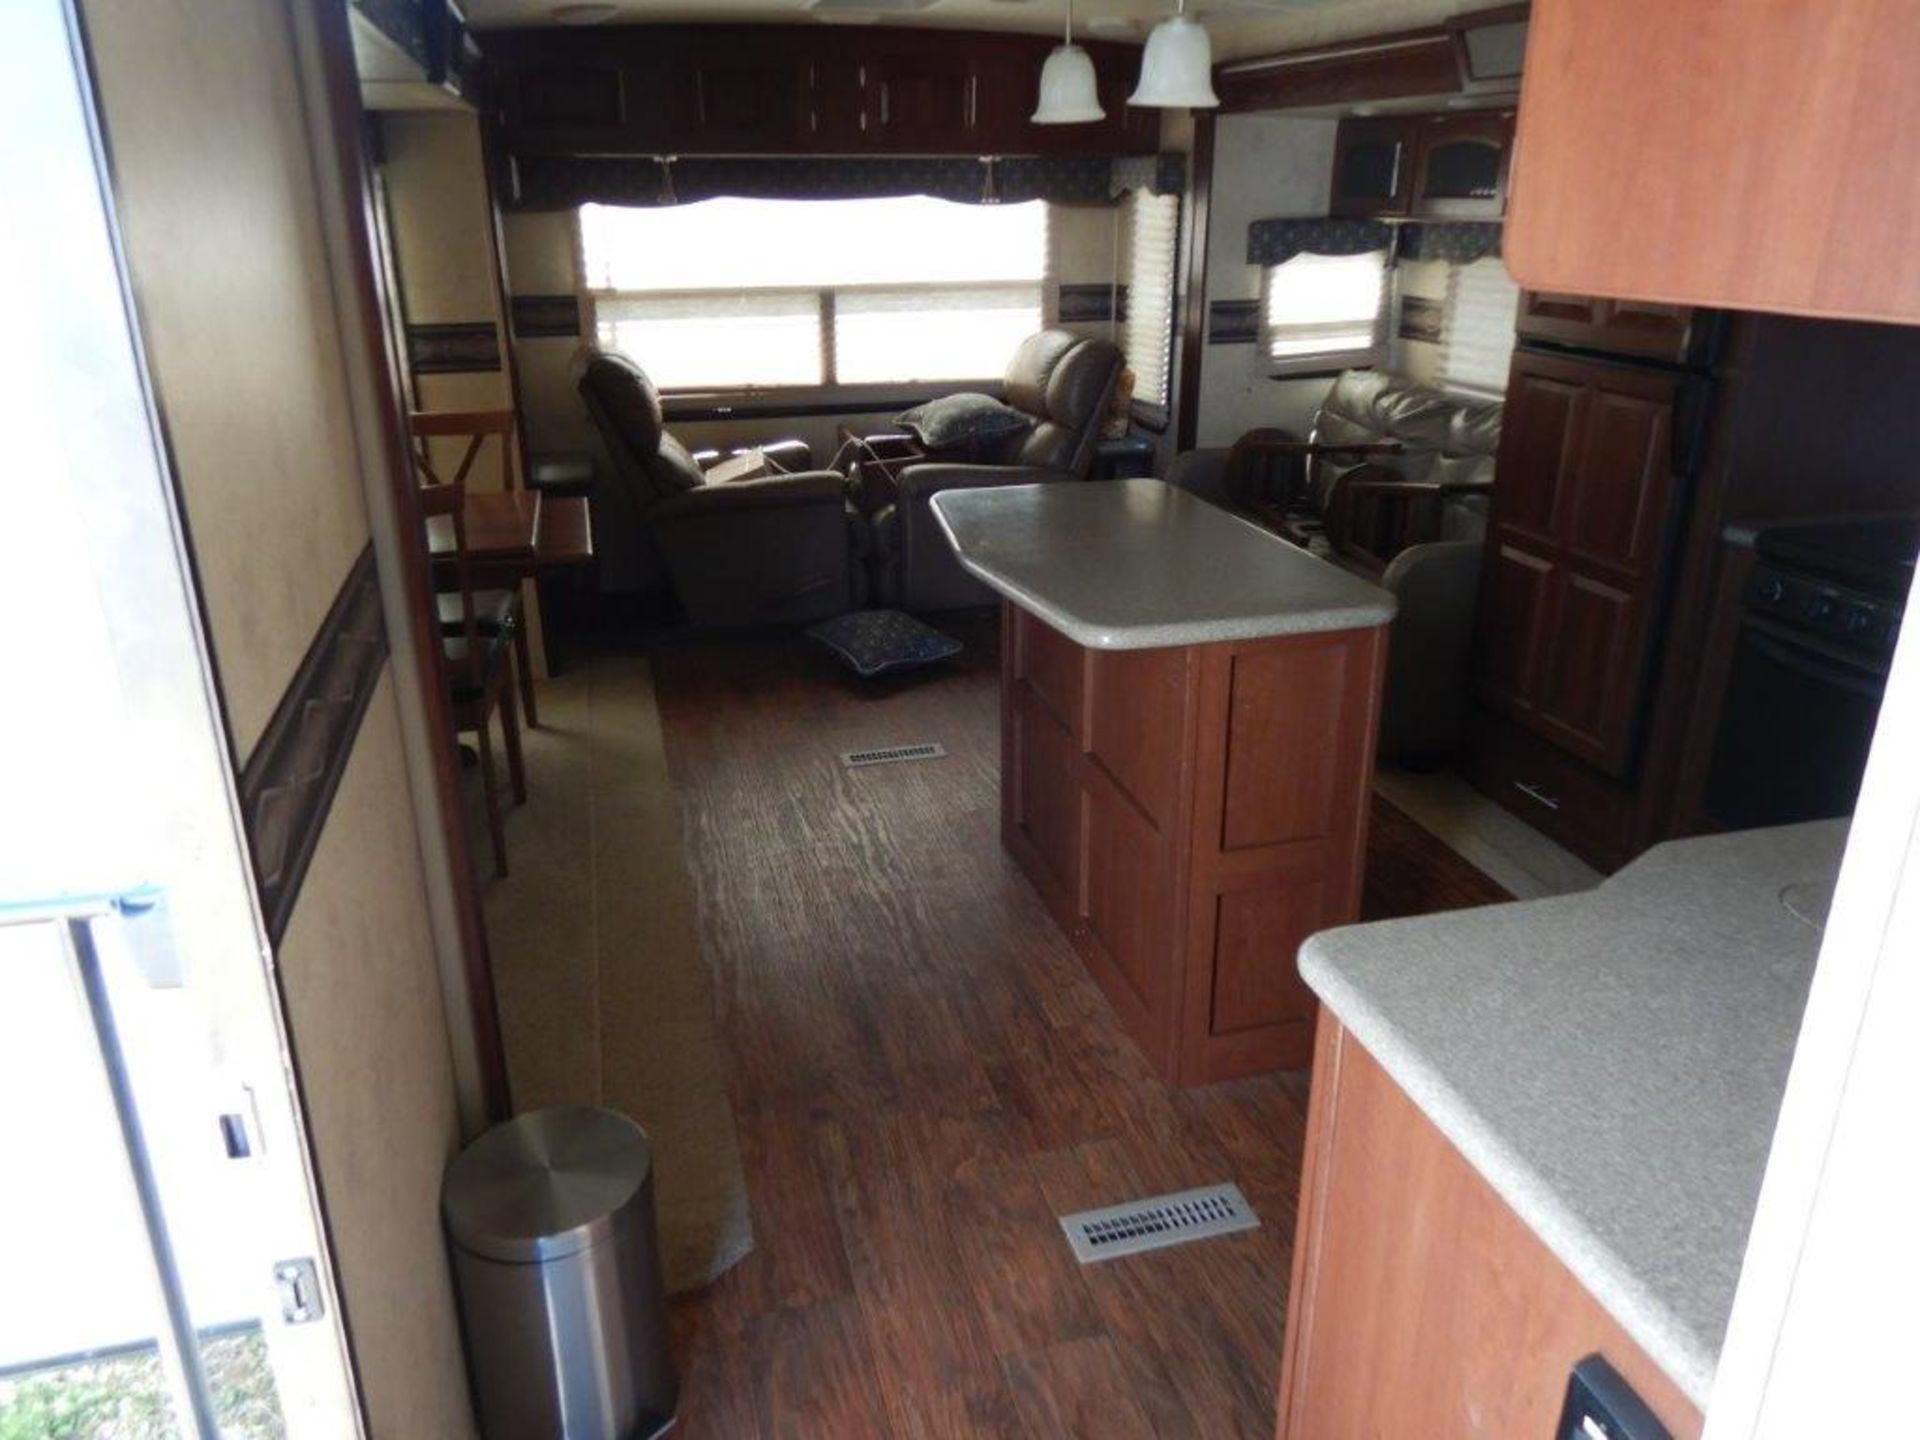 2015 FLAGSTAFF CLASSIC SUPER LITE 32FT TRAVEL TRAILER, 3 SLIDES, GREAT CONDITION BELOW 800 ROAD KMS! - Image 30 of 37